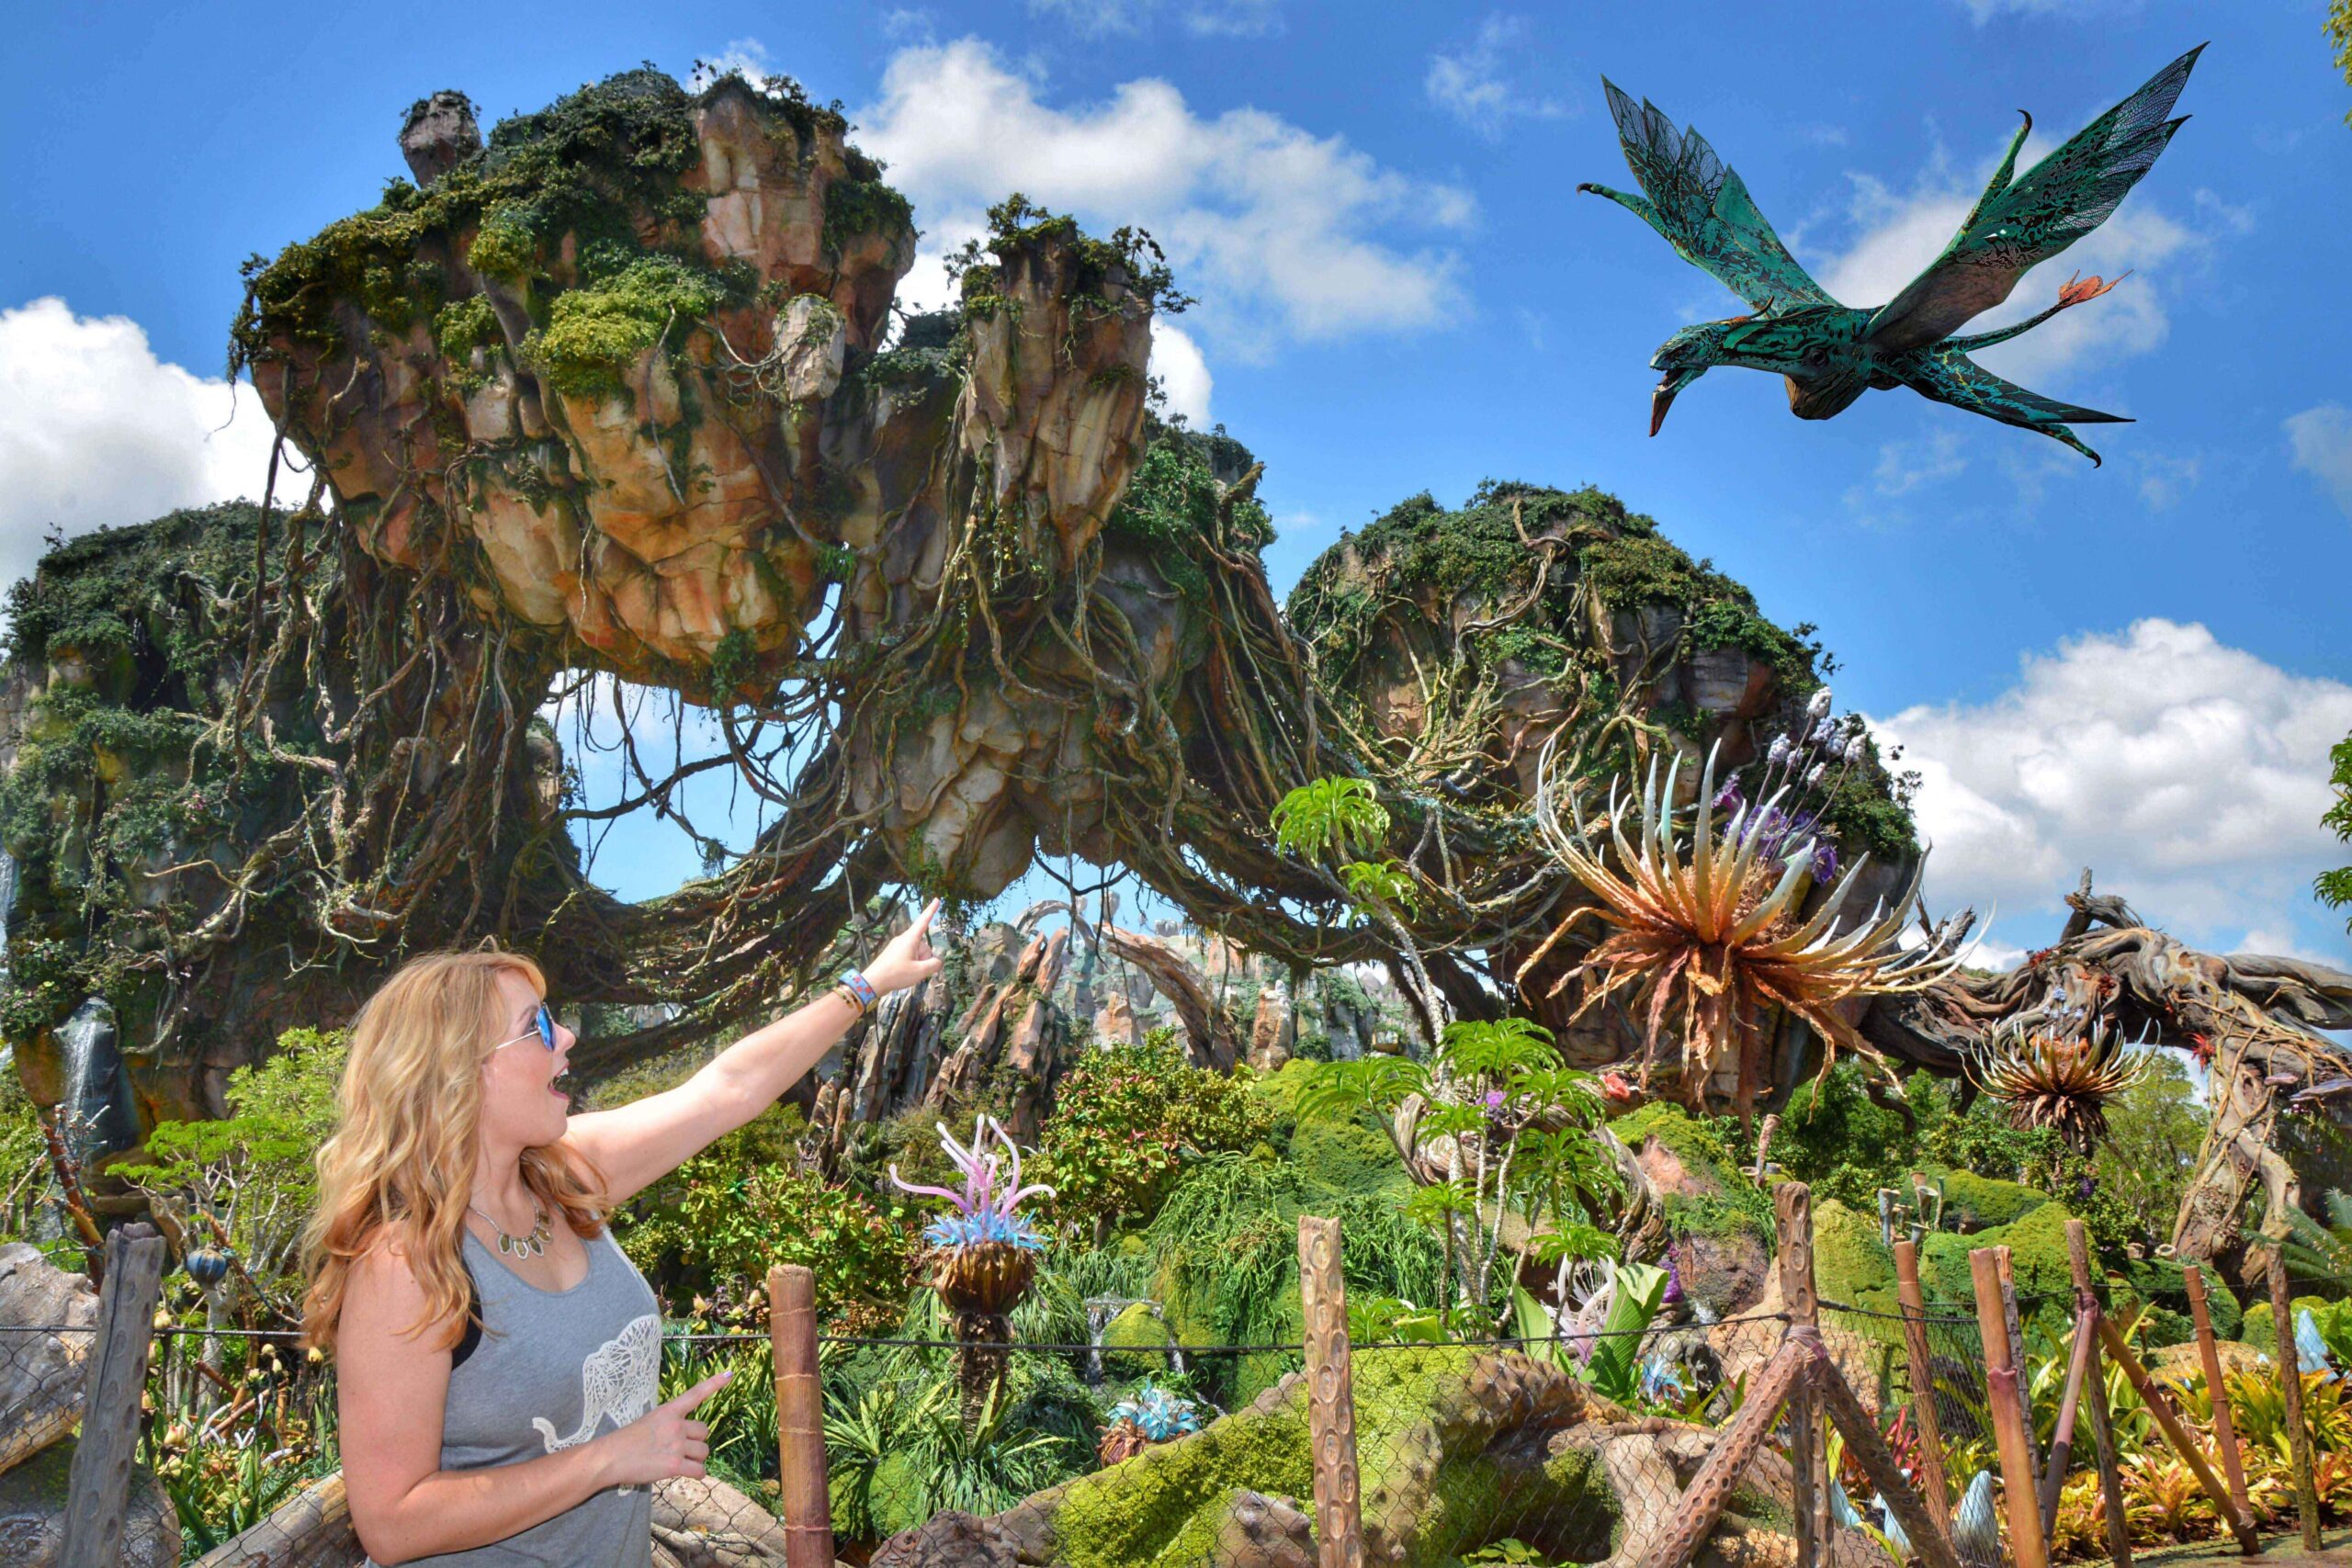 Pandora The World of Avatar: Review - Living By Disney